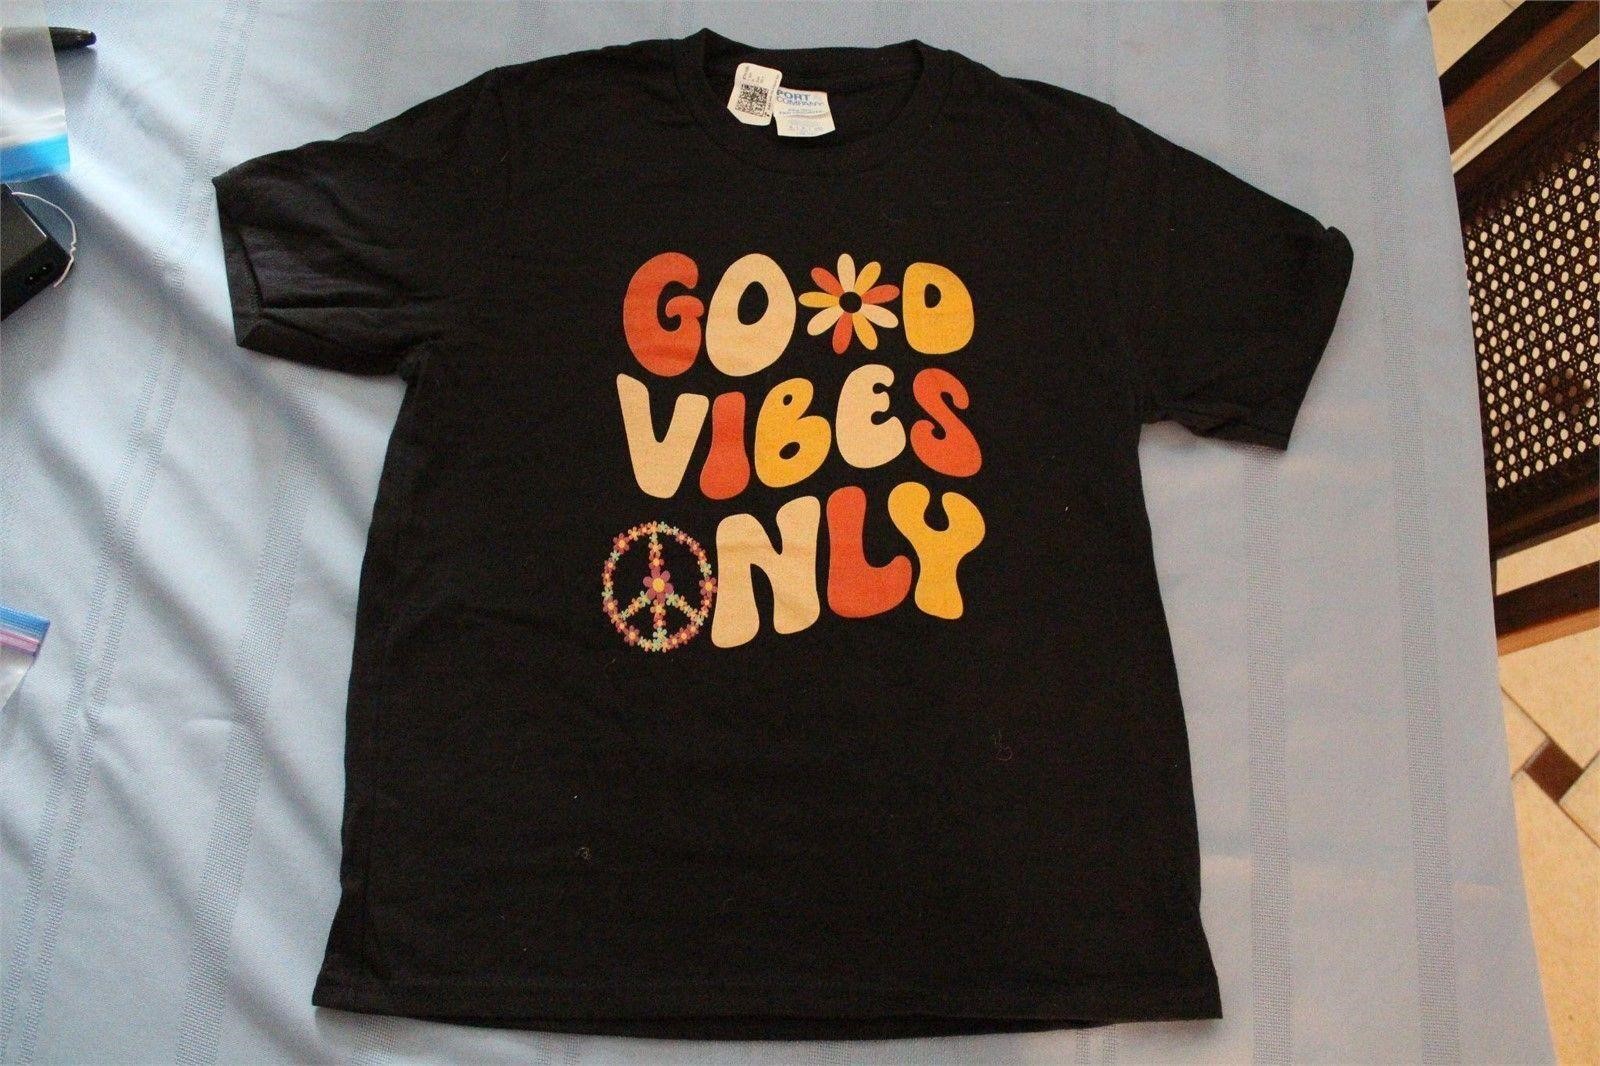 Youth's Good Vibes Only T-shirt Size S